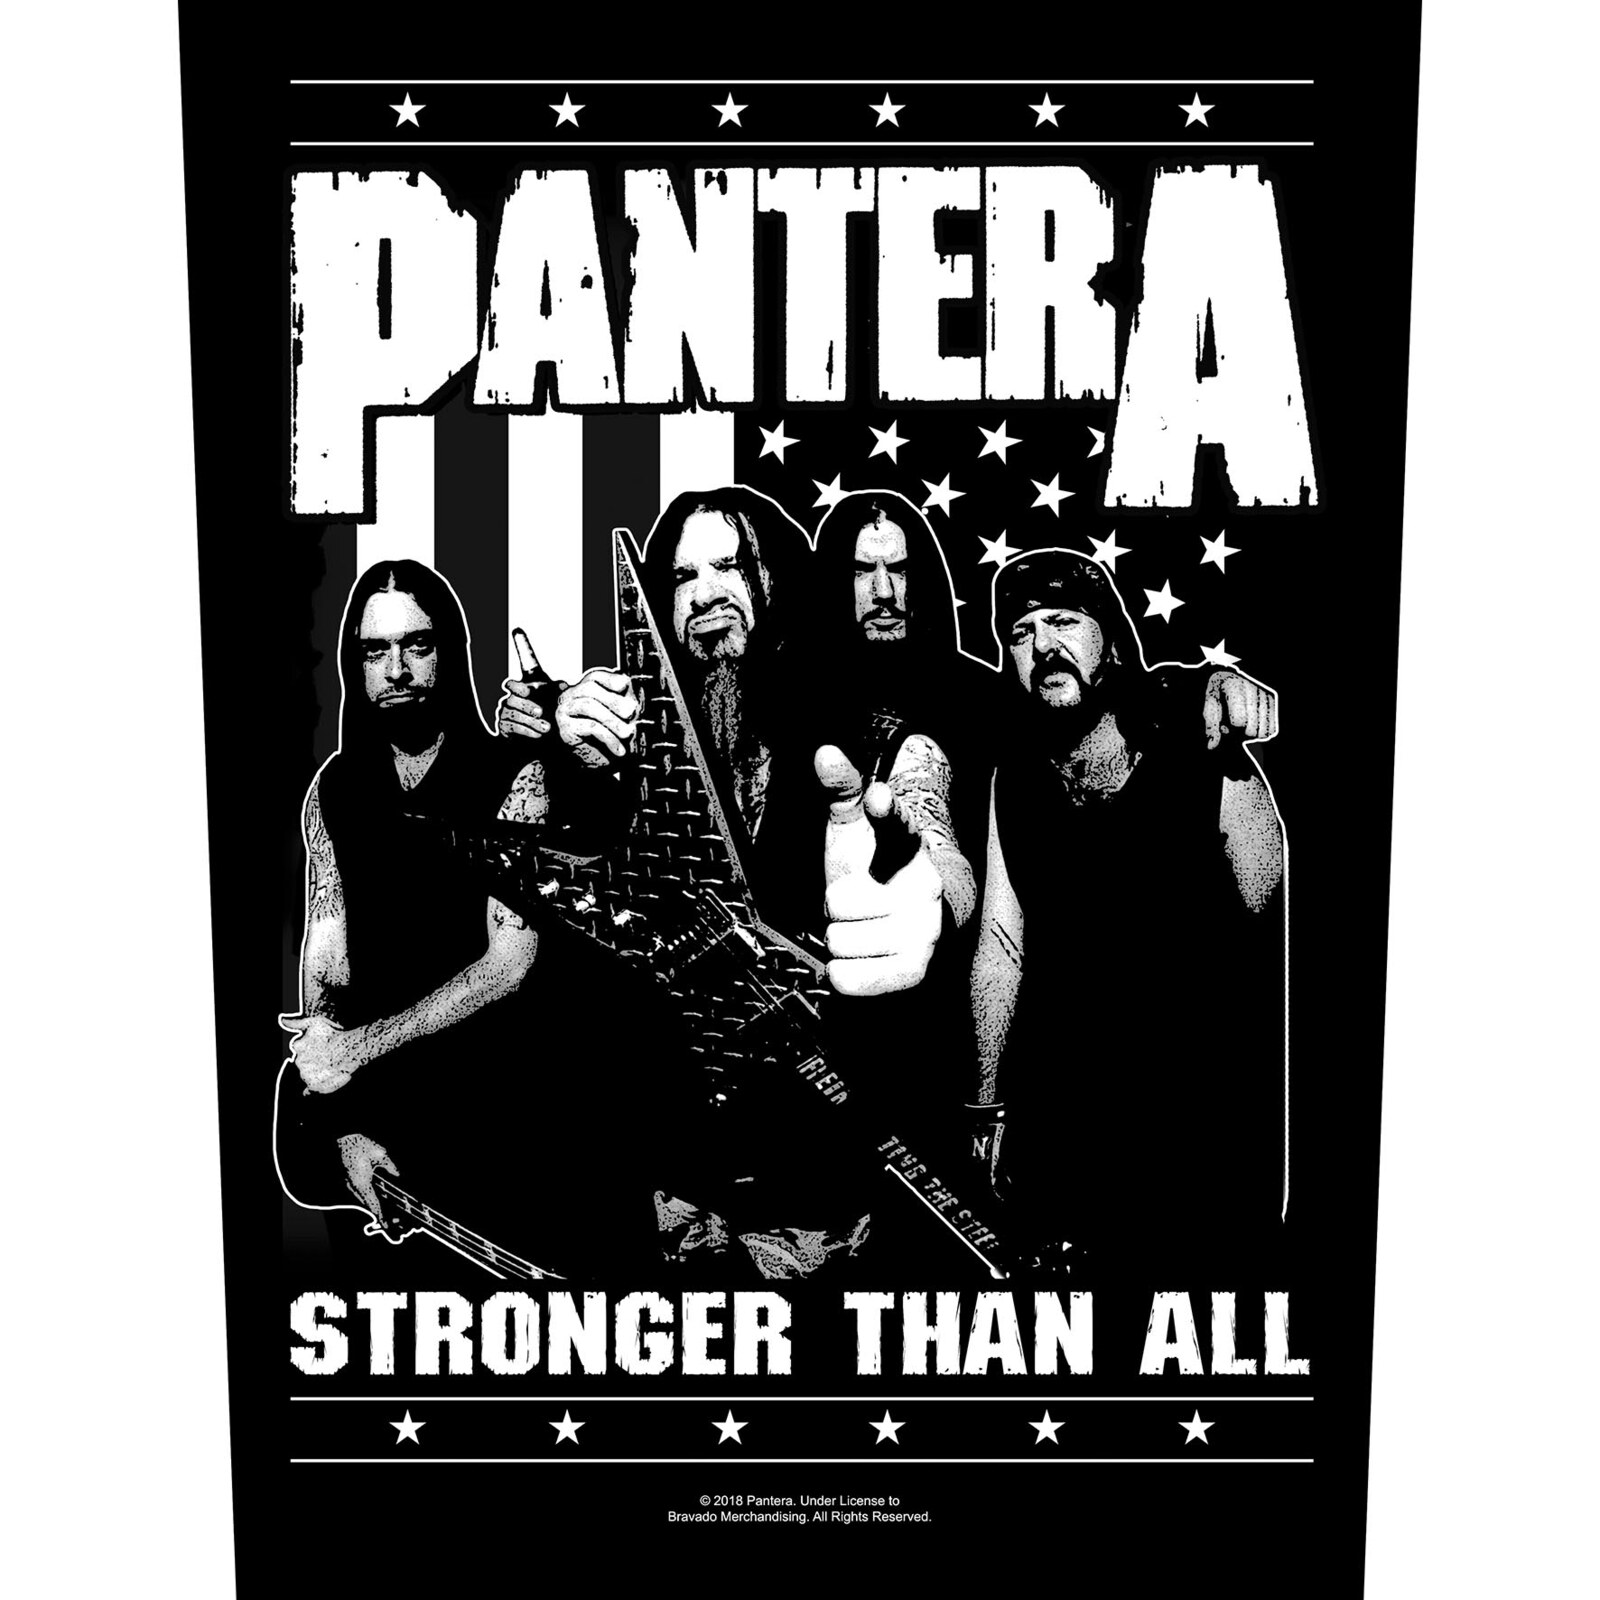 Pantera 101% Proof Sew On Patch Official Licensed Thrash Metal Band Badge New